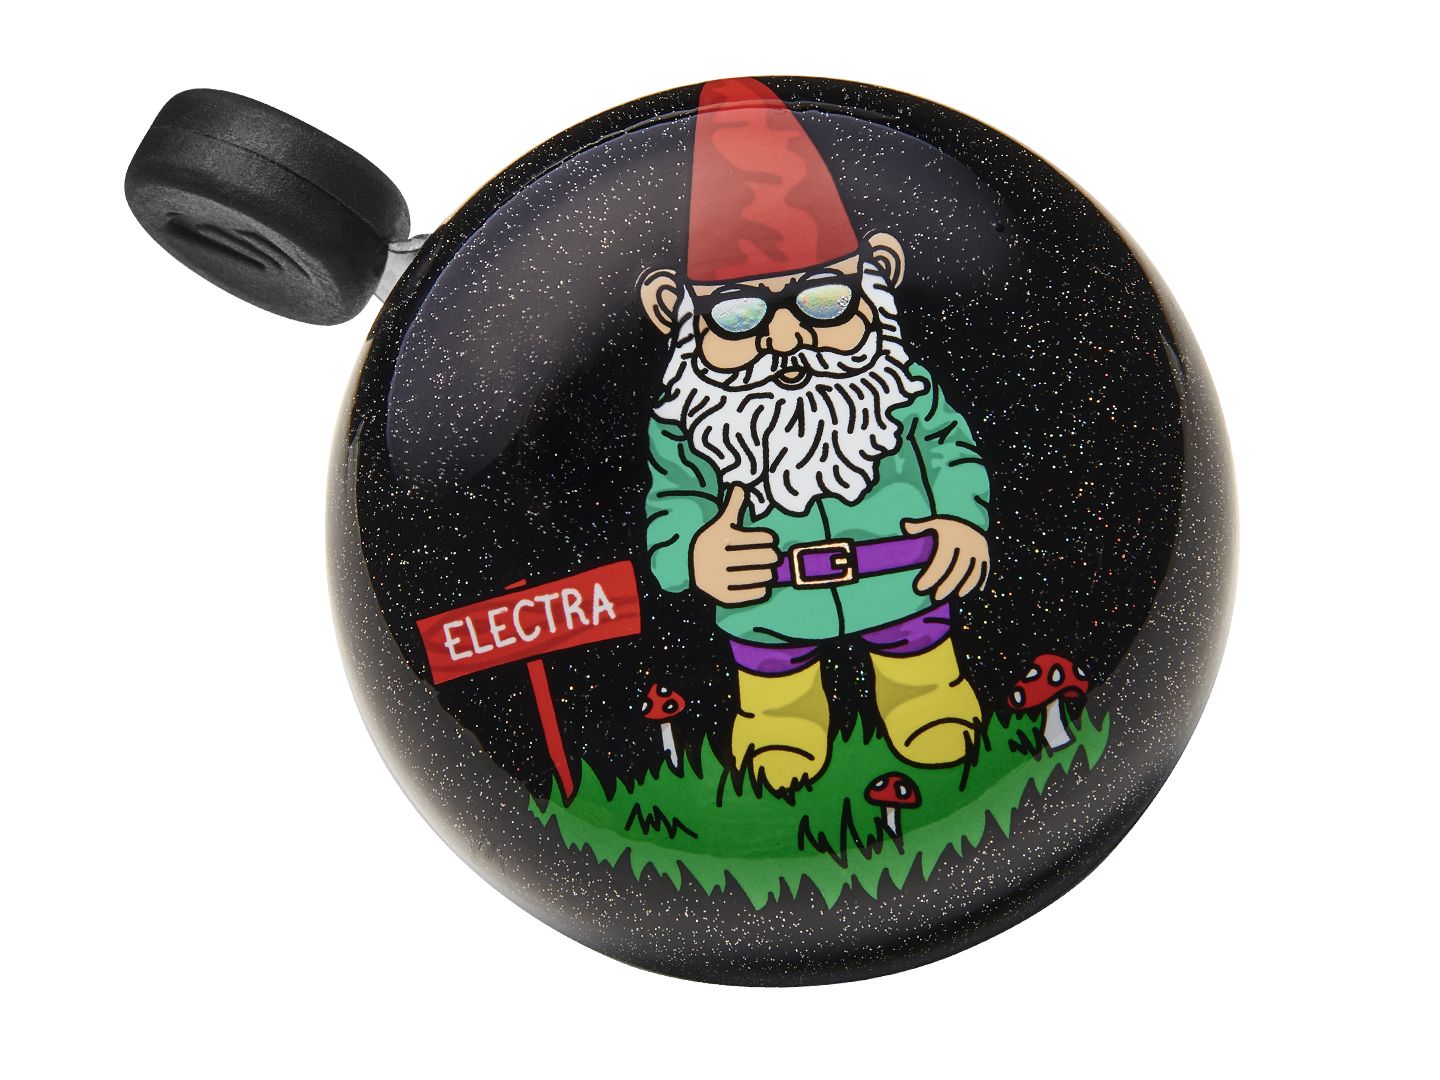 Bell Electra Domed Ringer Gnome